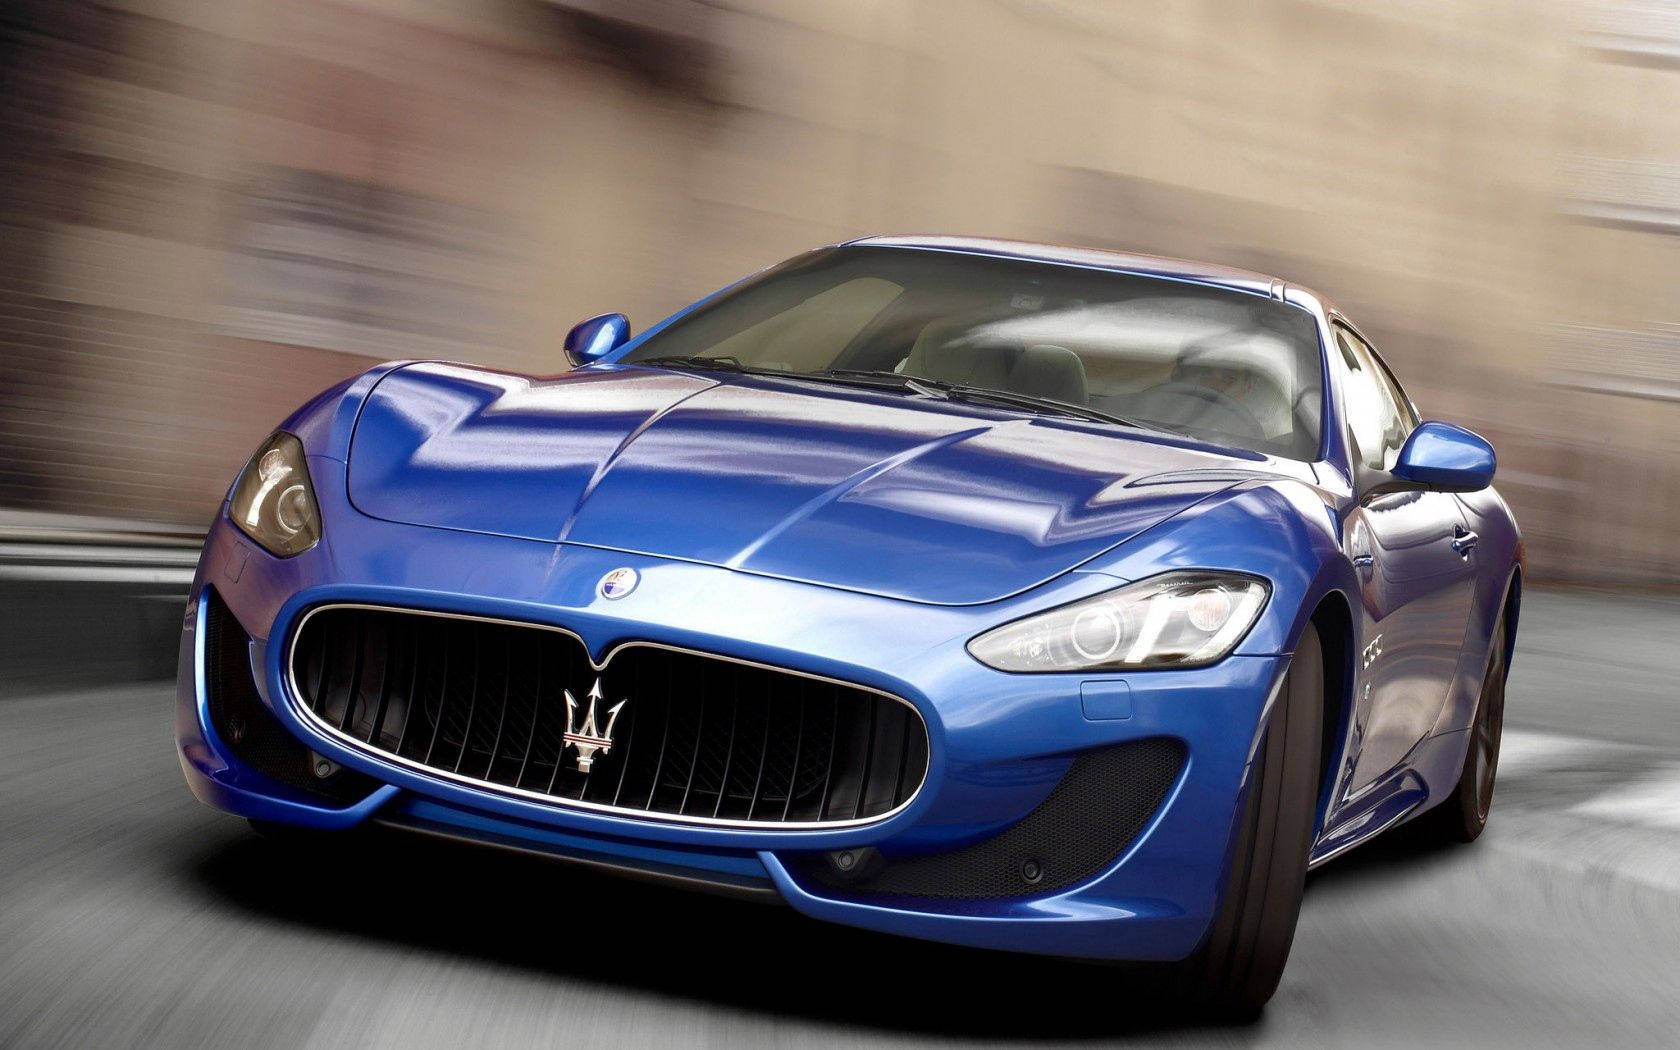 Cruise the Town in Style with This One-of-a-Kind Maserati Gran Turismo Car Wallpaper